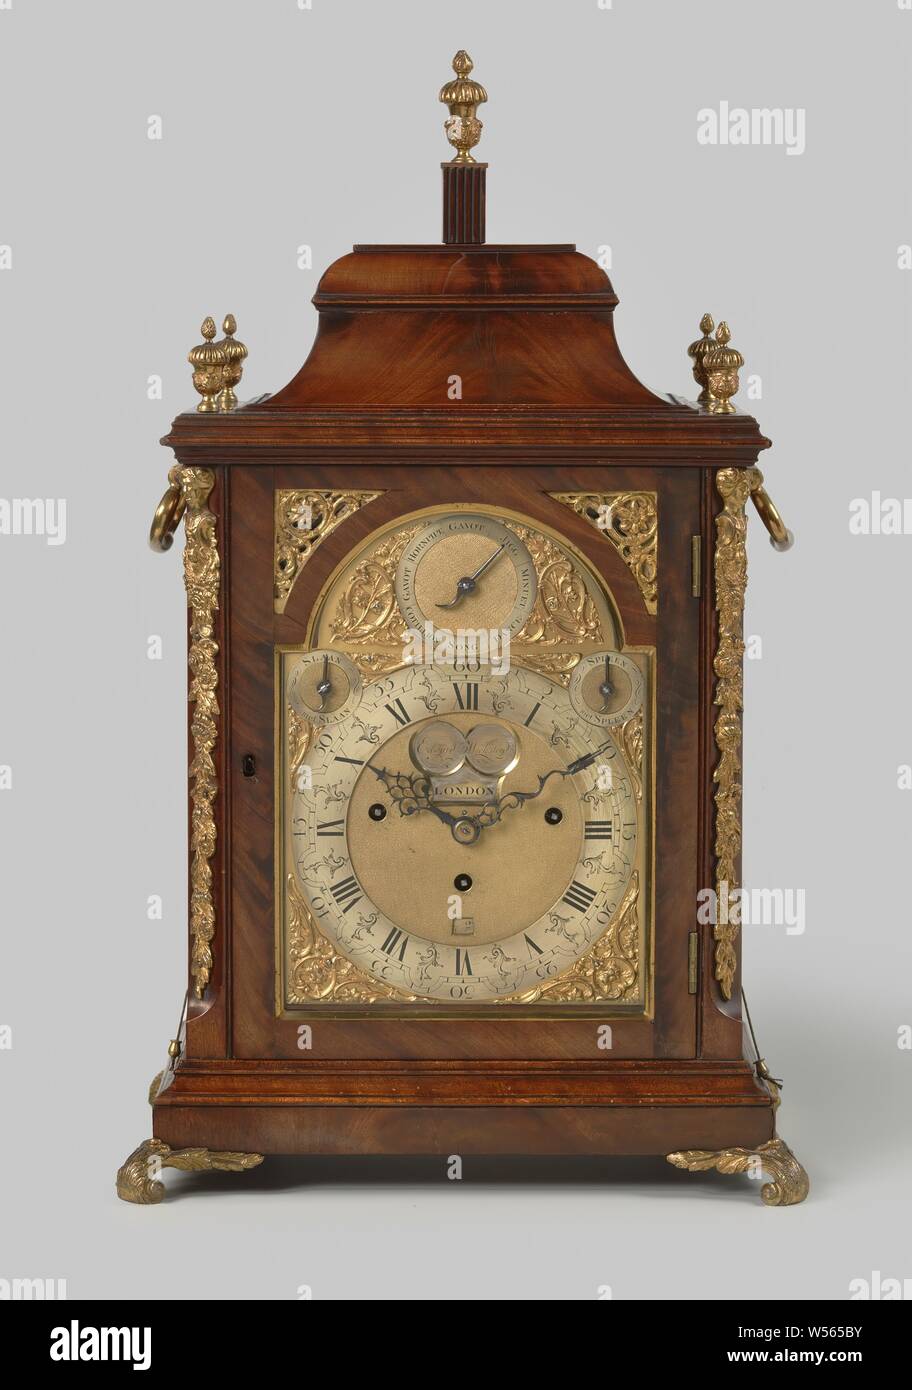 Table clock with percussion and playing, Table clock with percussion and playing. Case of mahogany, decorated with gold-plated copper. Dial and work are marked: EDWARD WICKSTEED.LONDON. The following roles have been put into the music roll: Gavot, Jigg, Minuet, Dance, Song, Cotillon, Gavot, Hornpipe., Edward Wicksteed, London, 1840 - 1860, mahogany (wood), brass (alloy), bronze (metal), gilding, h 63.5 cm × w 38.5 cm × d 26.5 cm Stock Photo